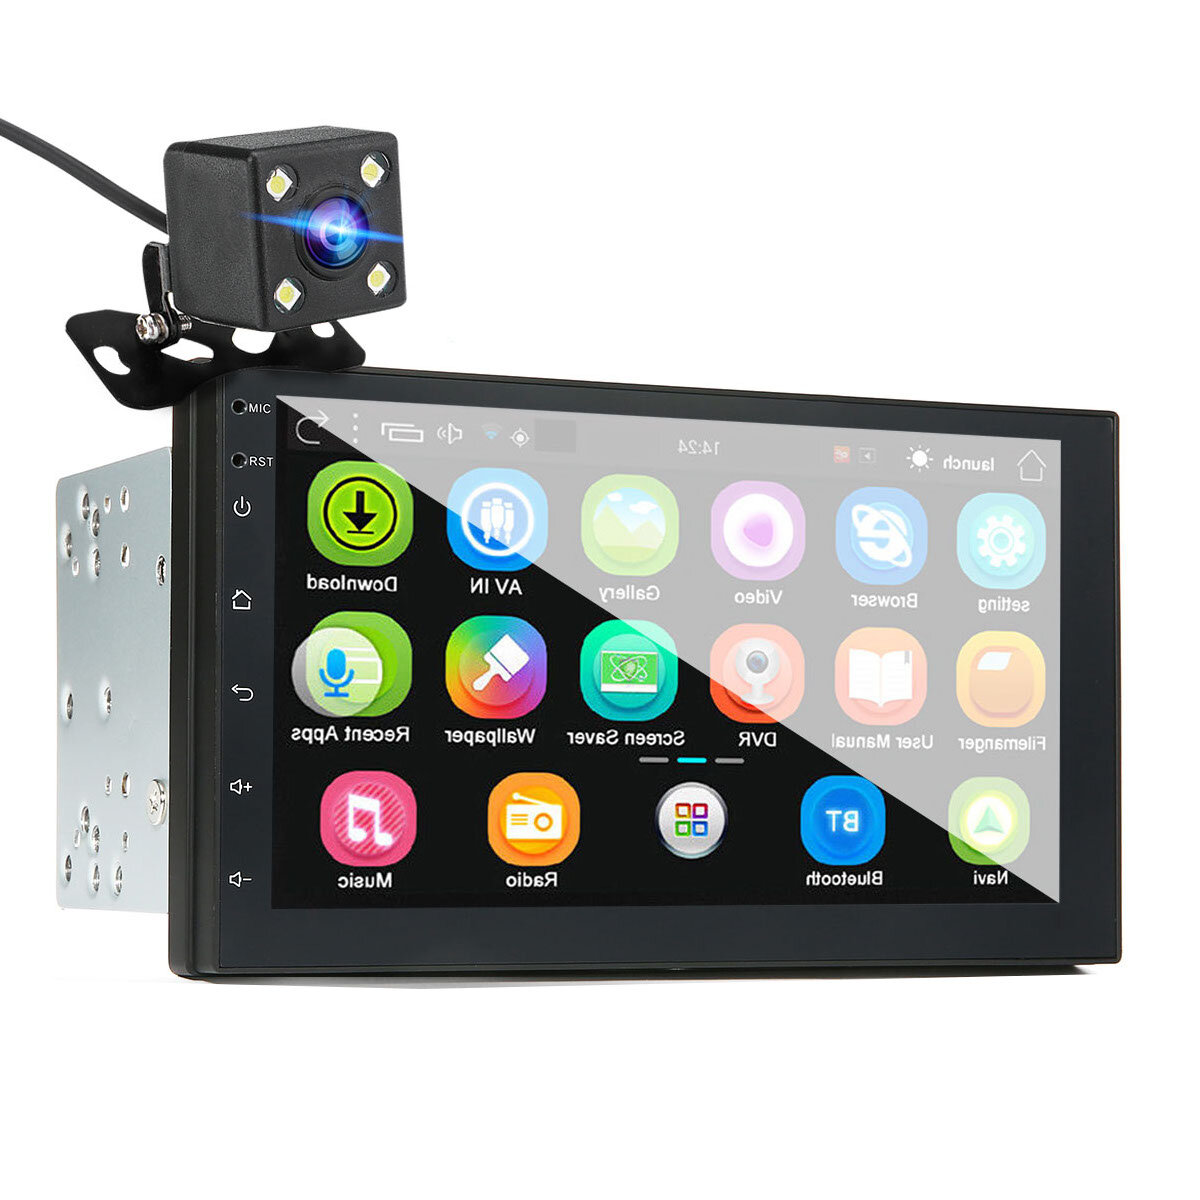 2DIN 7/" Android 8.1 Car Stereo MP5 Player Bluetooth GPS Navi WiFi FM+Rear Camera